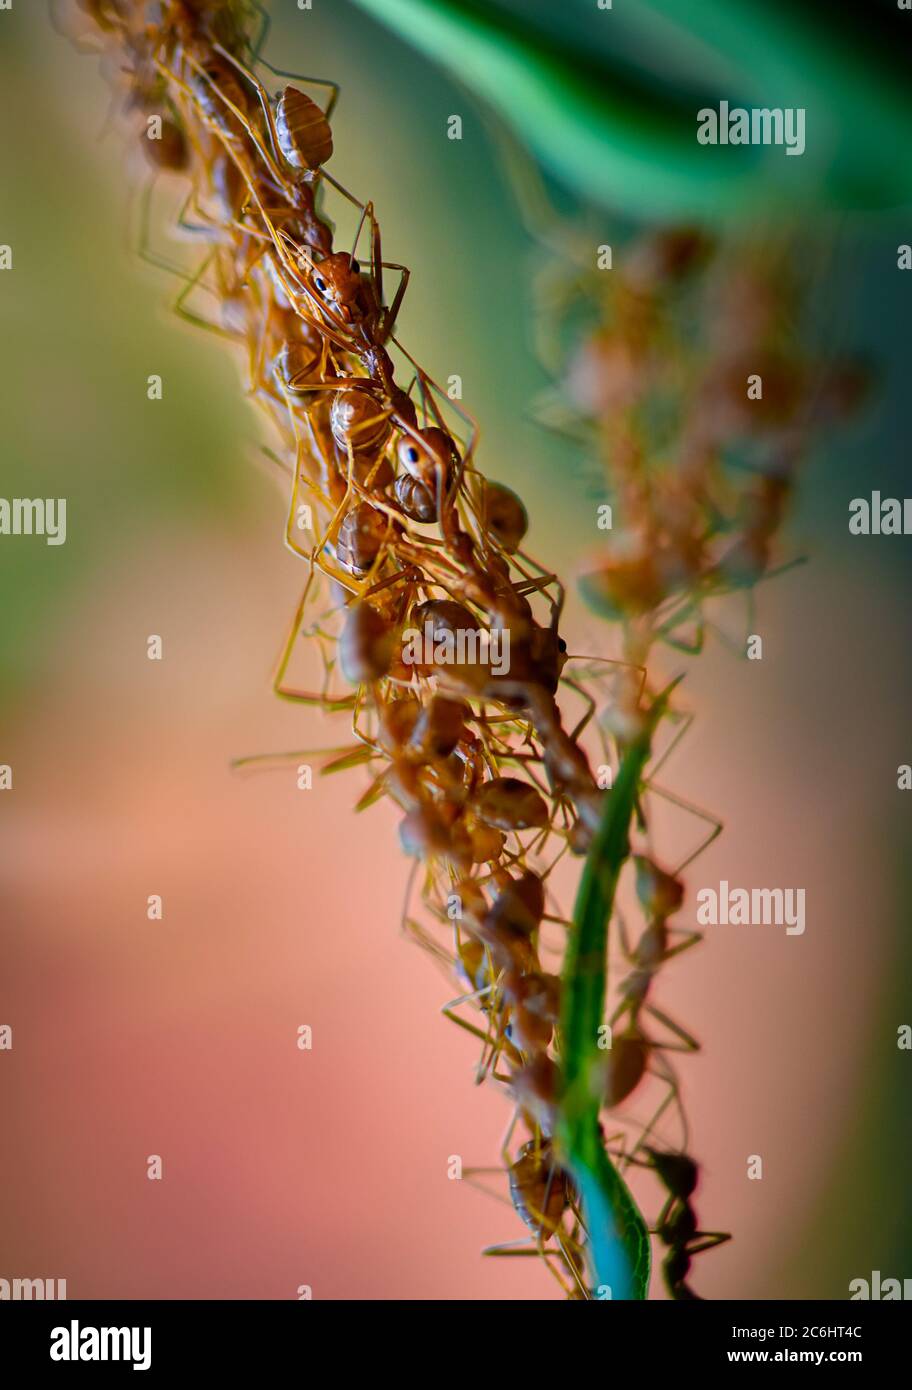 Cooperation of Weaver ants -Oecophylla smaragdina, forming a living chain during a nest build process Stock Photo